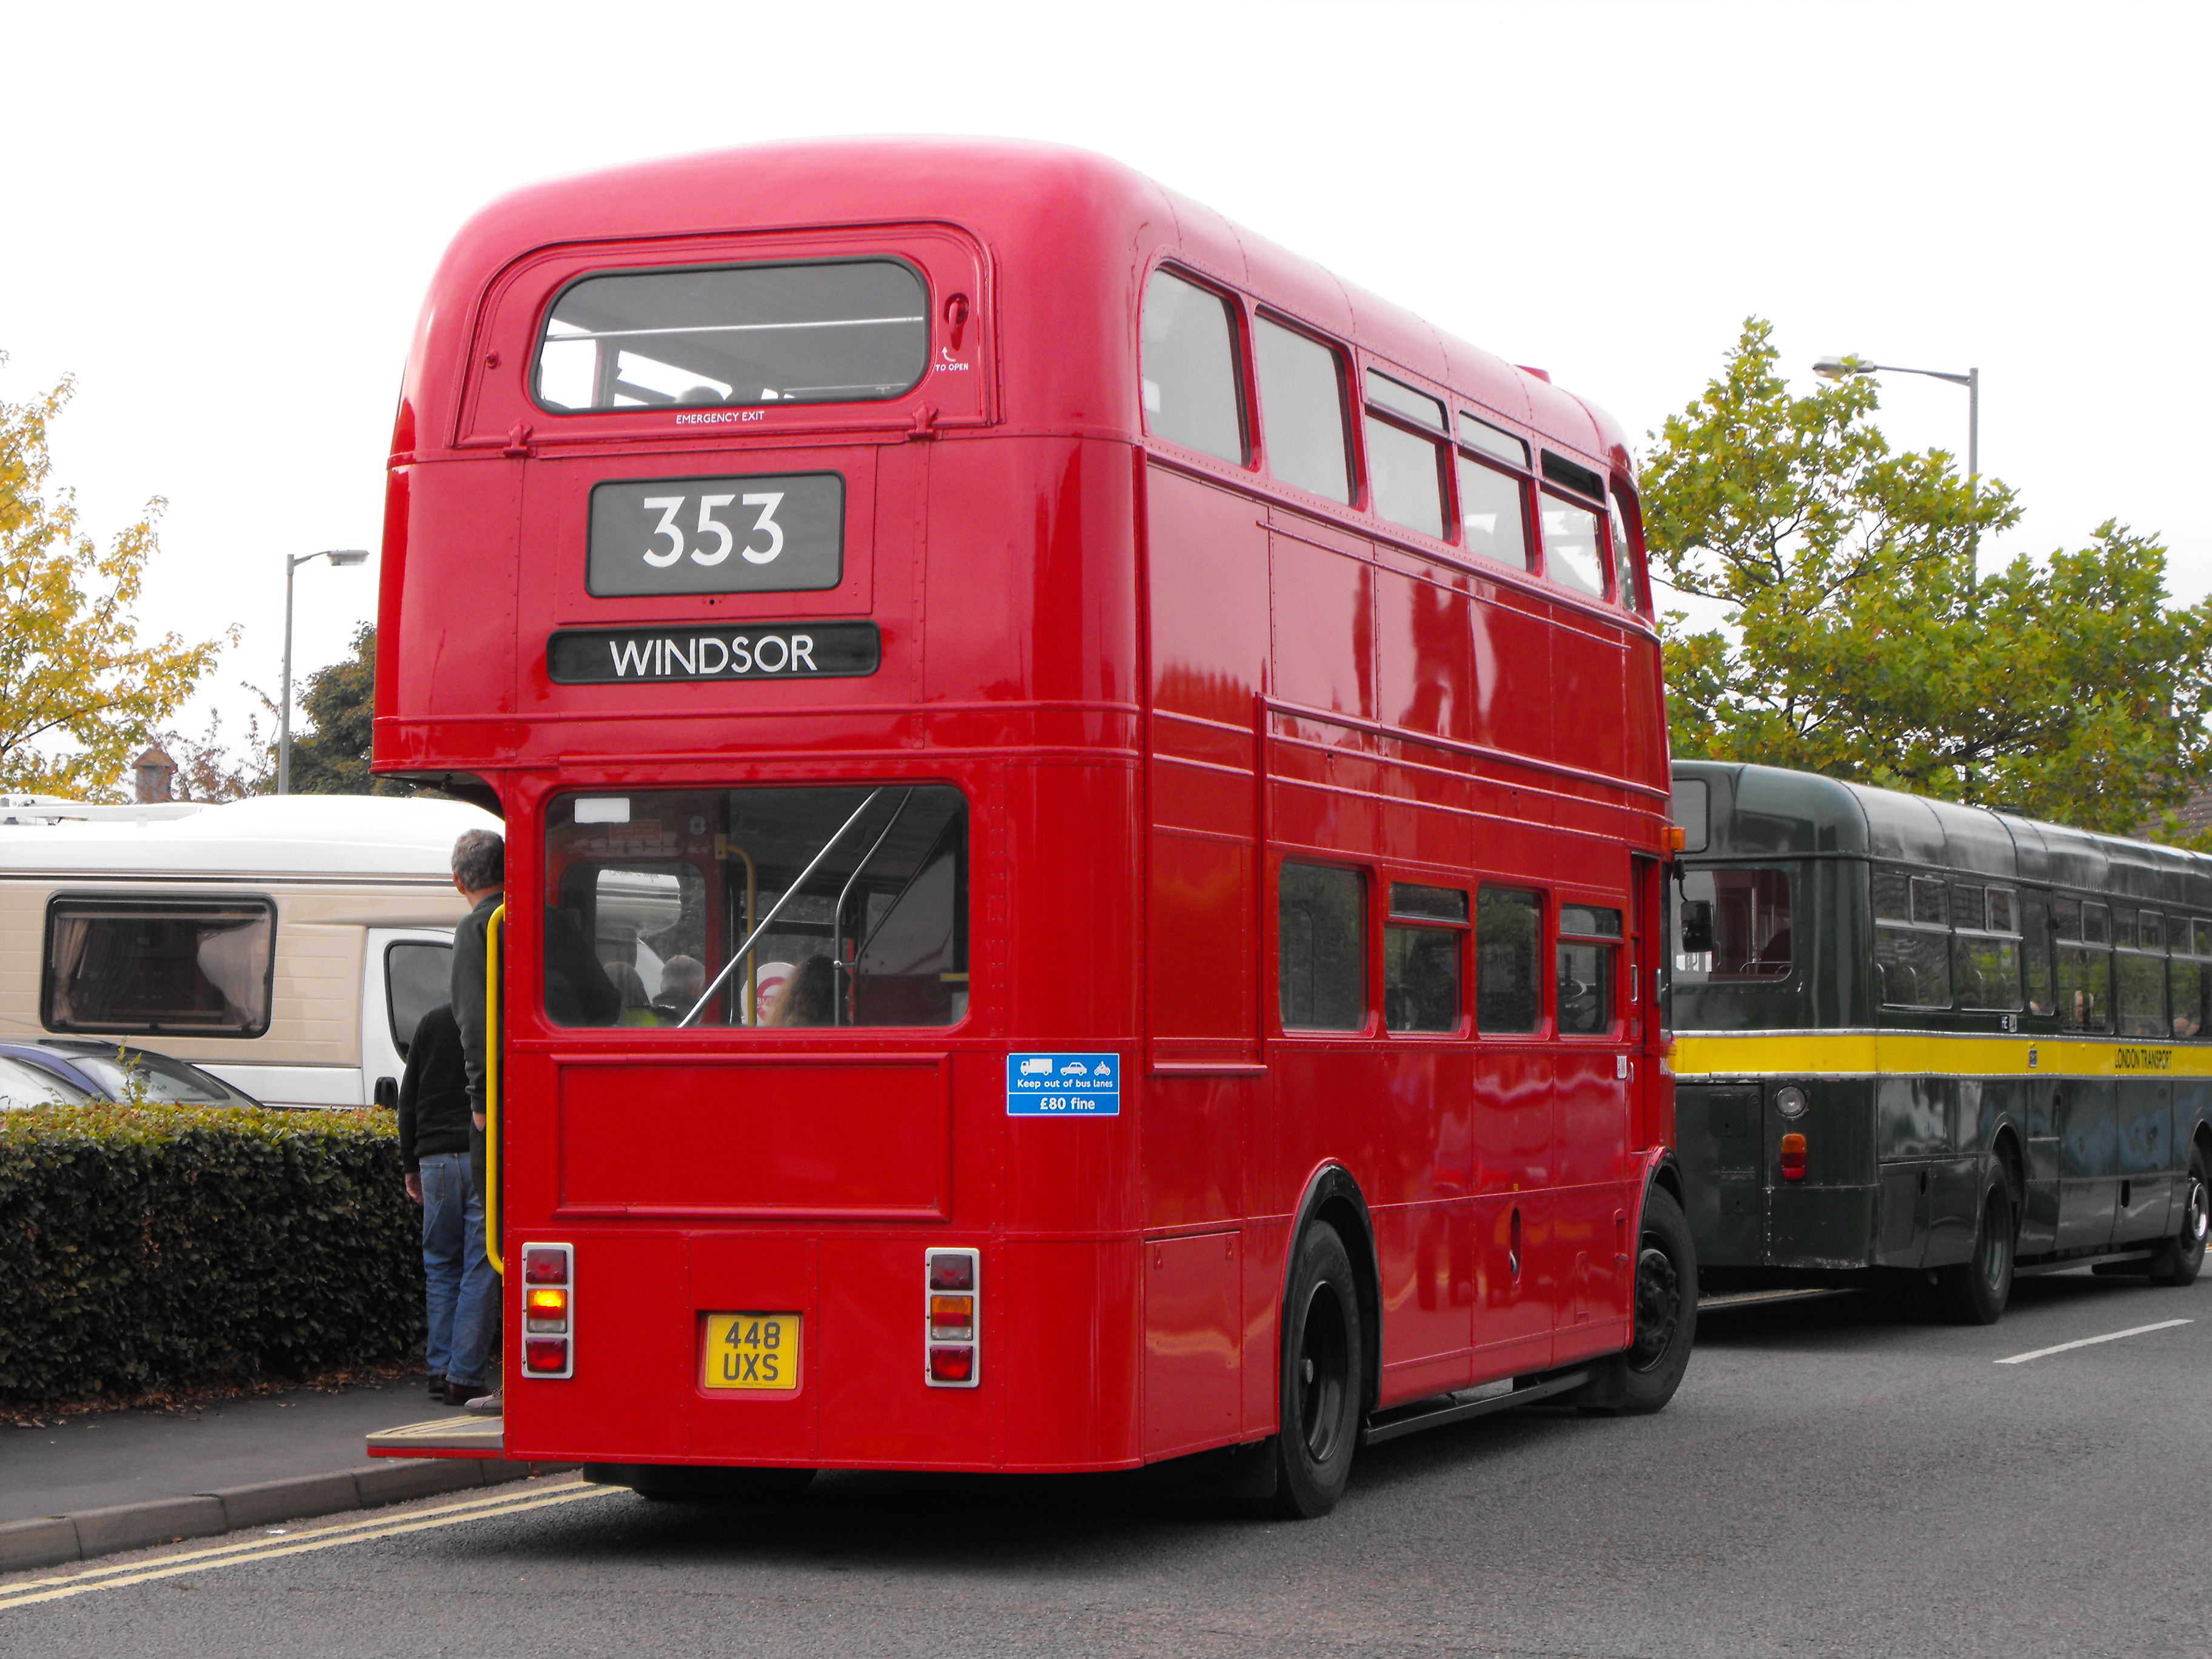 RM 848, 448 UXS, AEC Routemaster (t.2012) | Flickr - Photo Sharing!